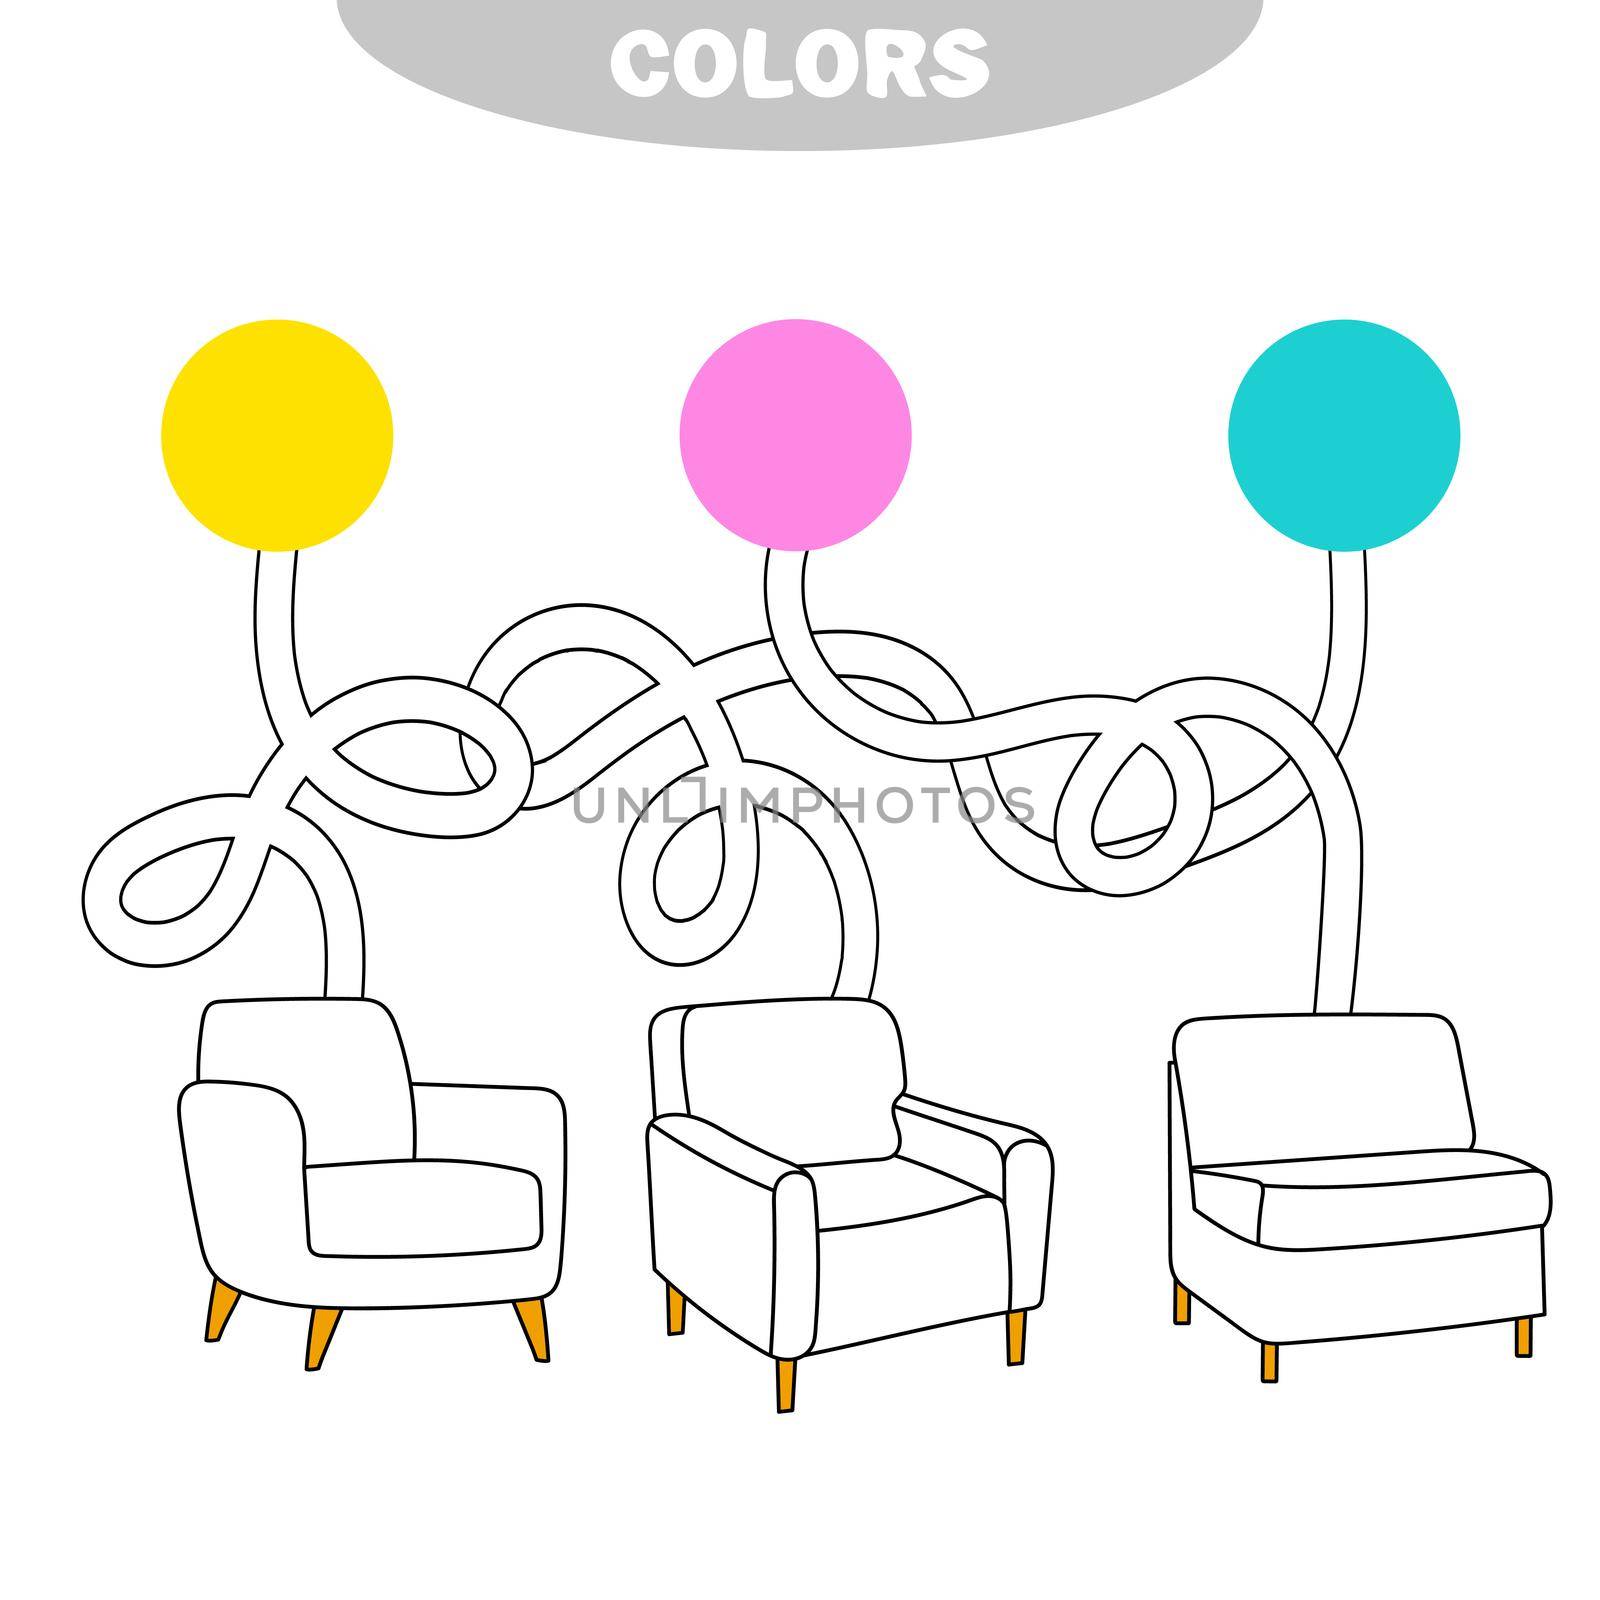 Puzzle for children. Pick a color, go through the maze and paint the chair the right color. Coloring book for children